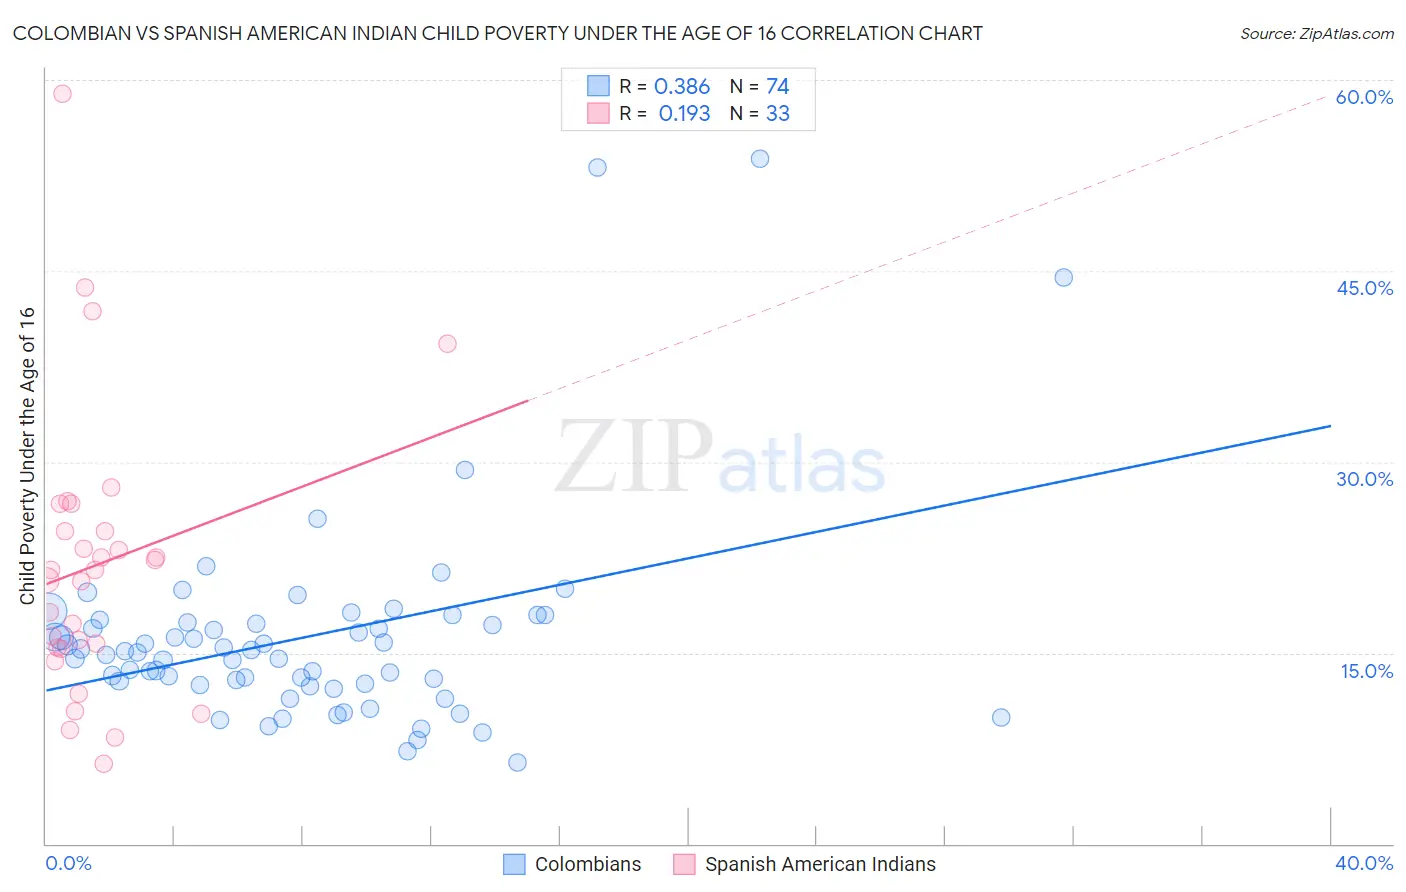 Colombian vs Spanish American Indian Child Poverty Under the Age of 16